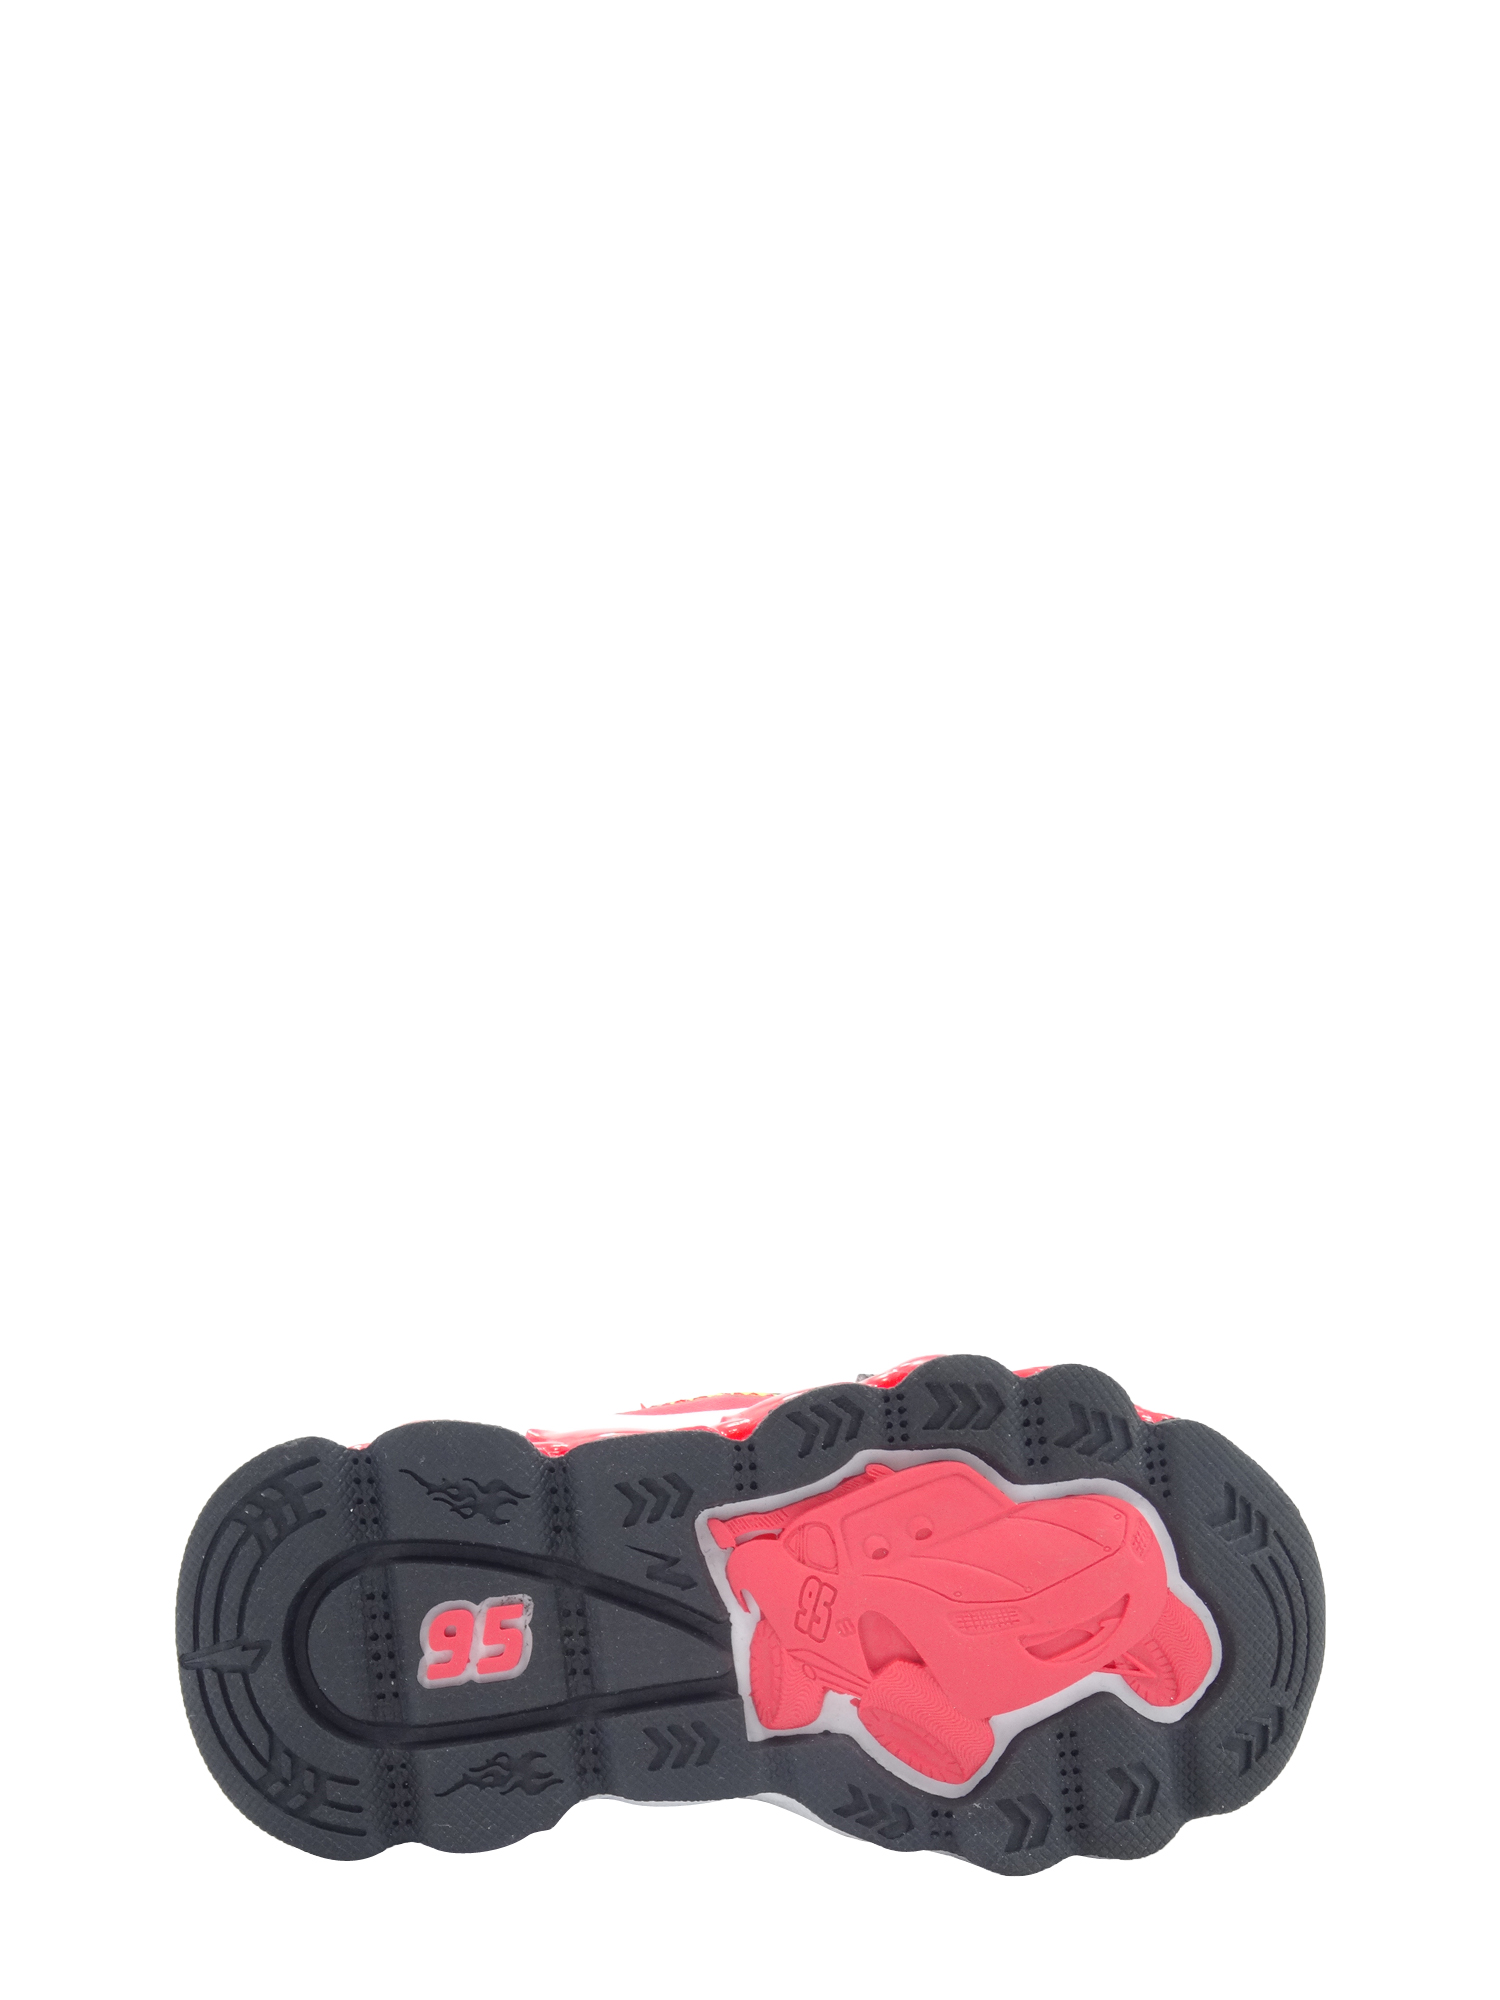 Cars Licensed Boys' Athletic Shoe - image 2 of 5